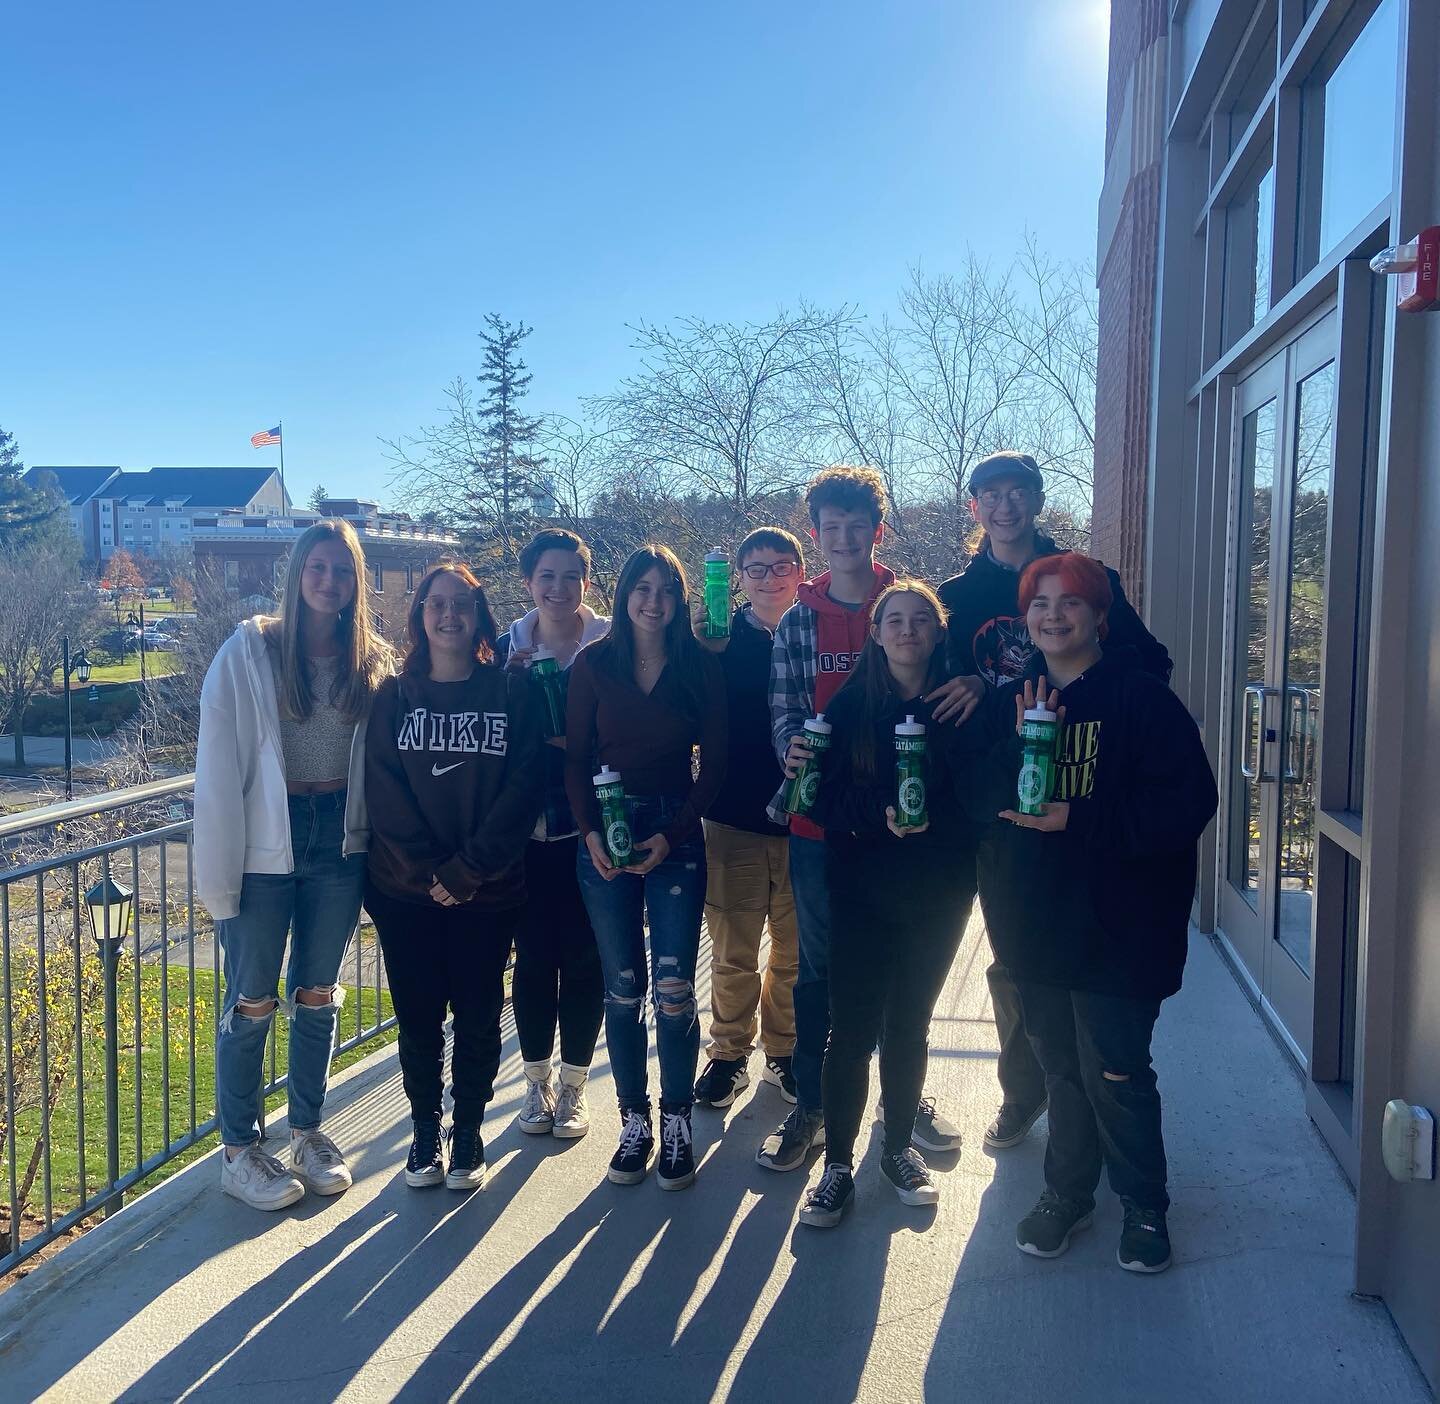 Got the pleasure of visiting @universityofvermont yesterday for the annual Sophomore Summit/First-Gen Celebration! We got to attend workshops on financial aid and admissions, listened in on a student panel of UVM alum, and toured their beautiful camp